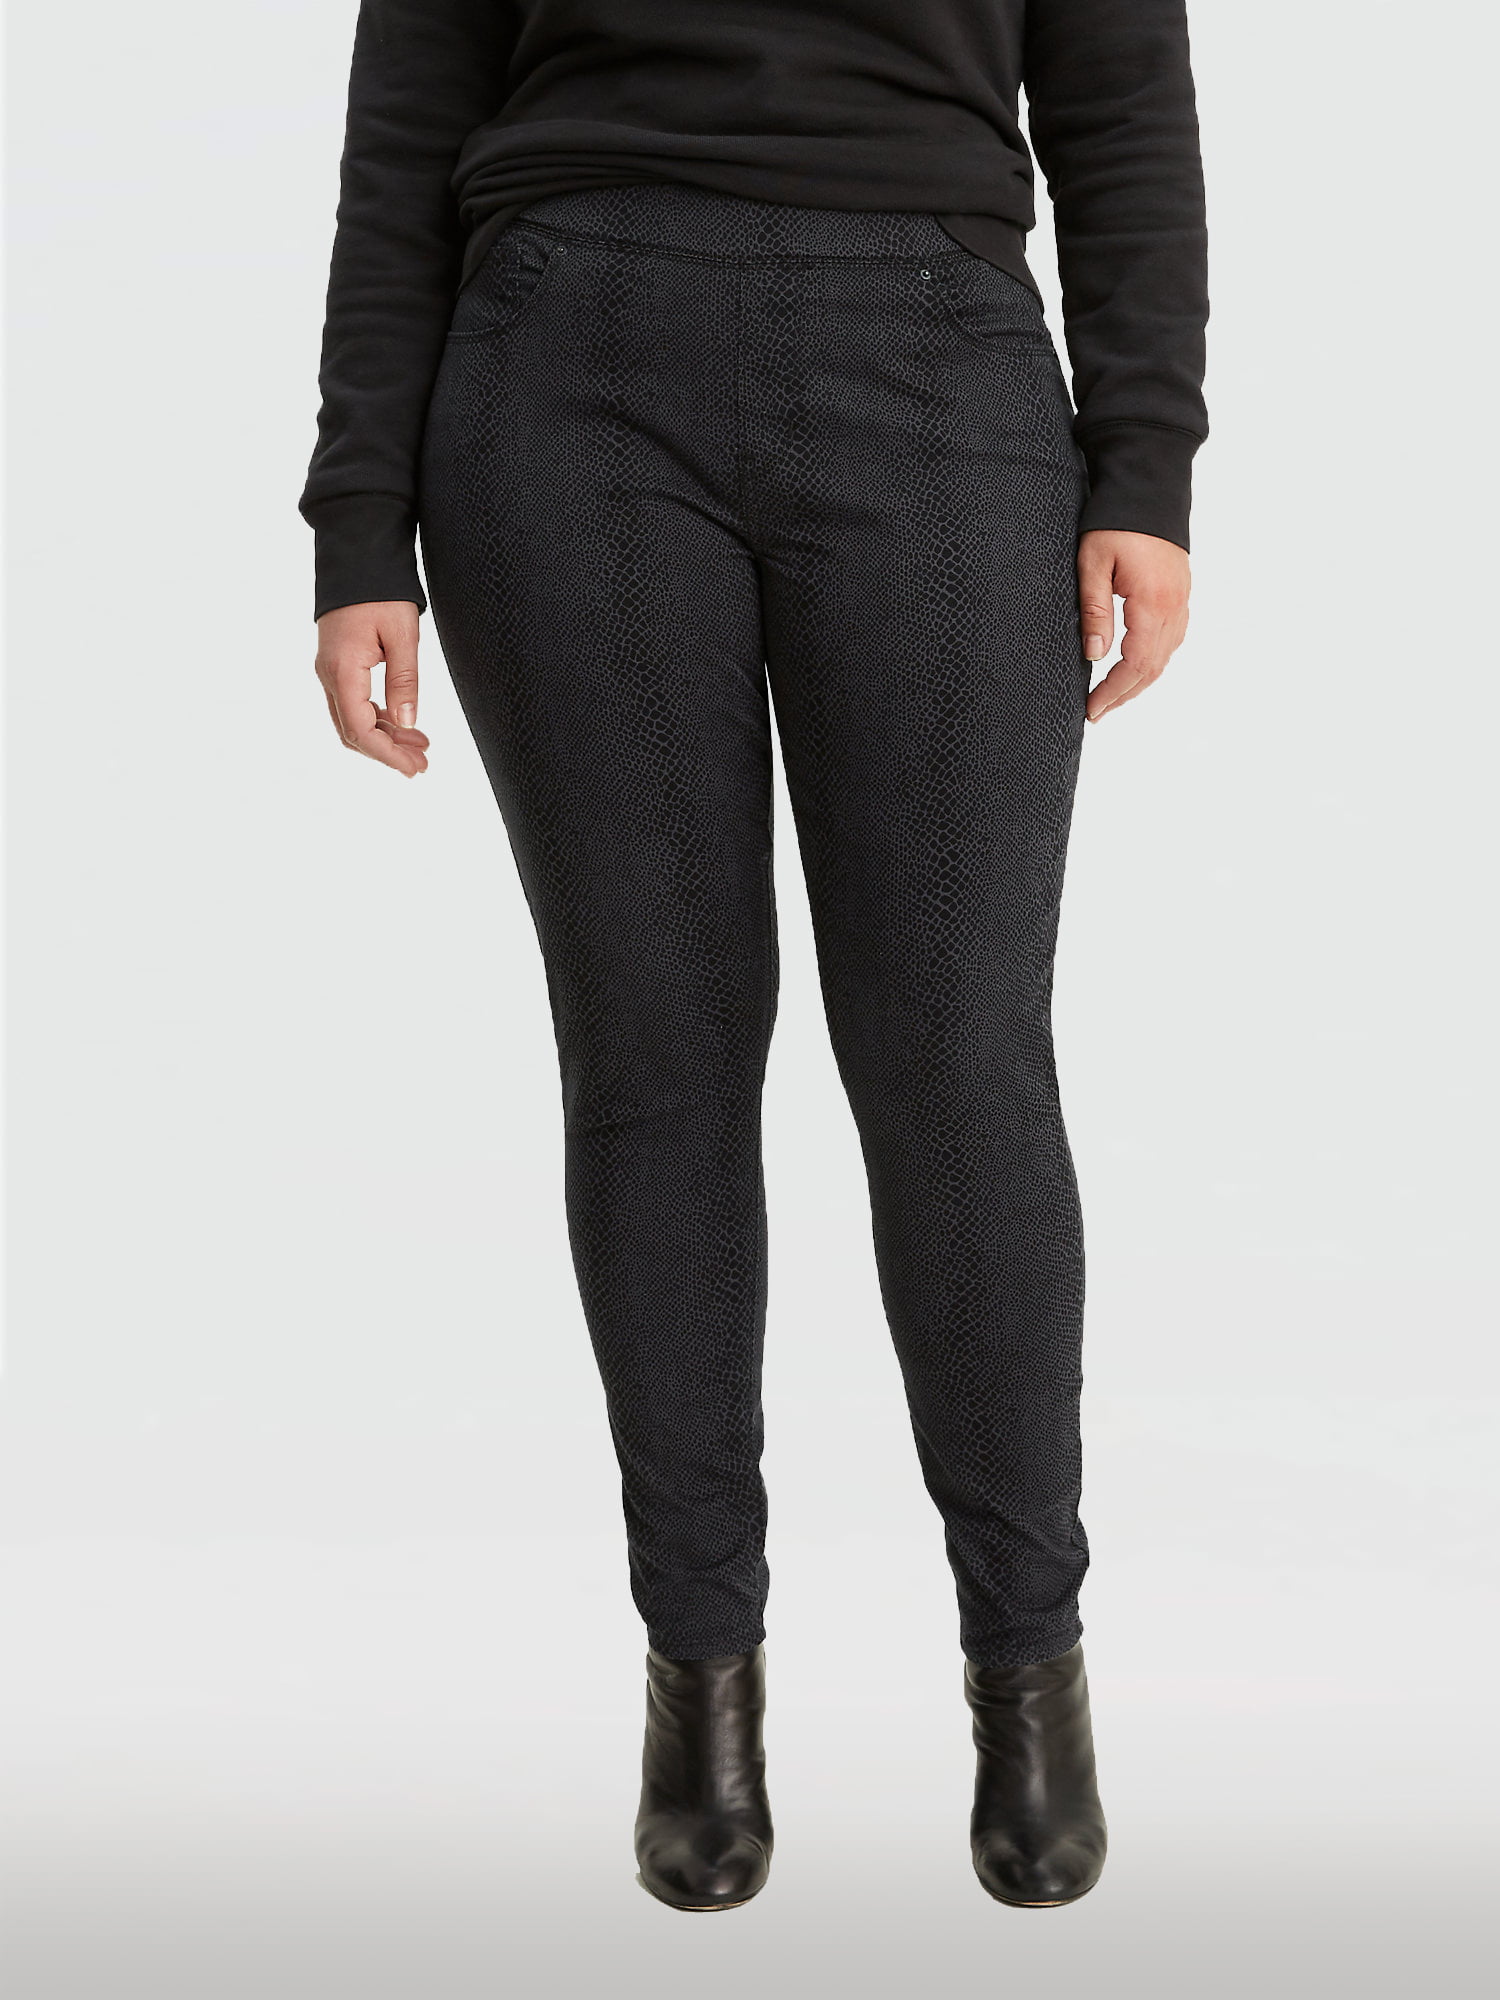 levi pull on jeans plus size